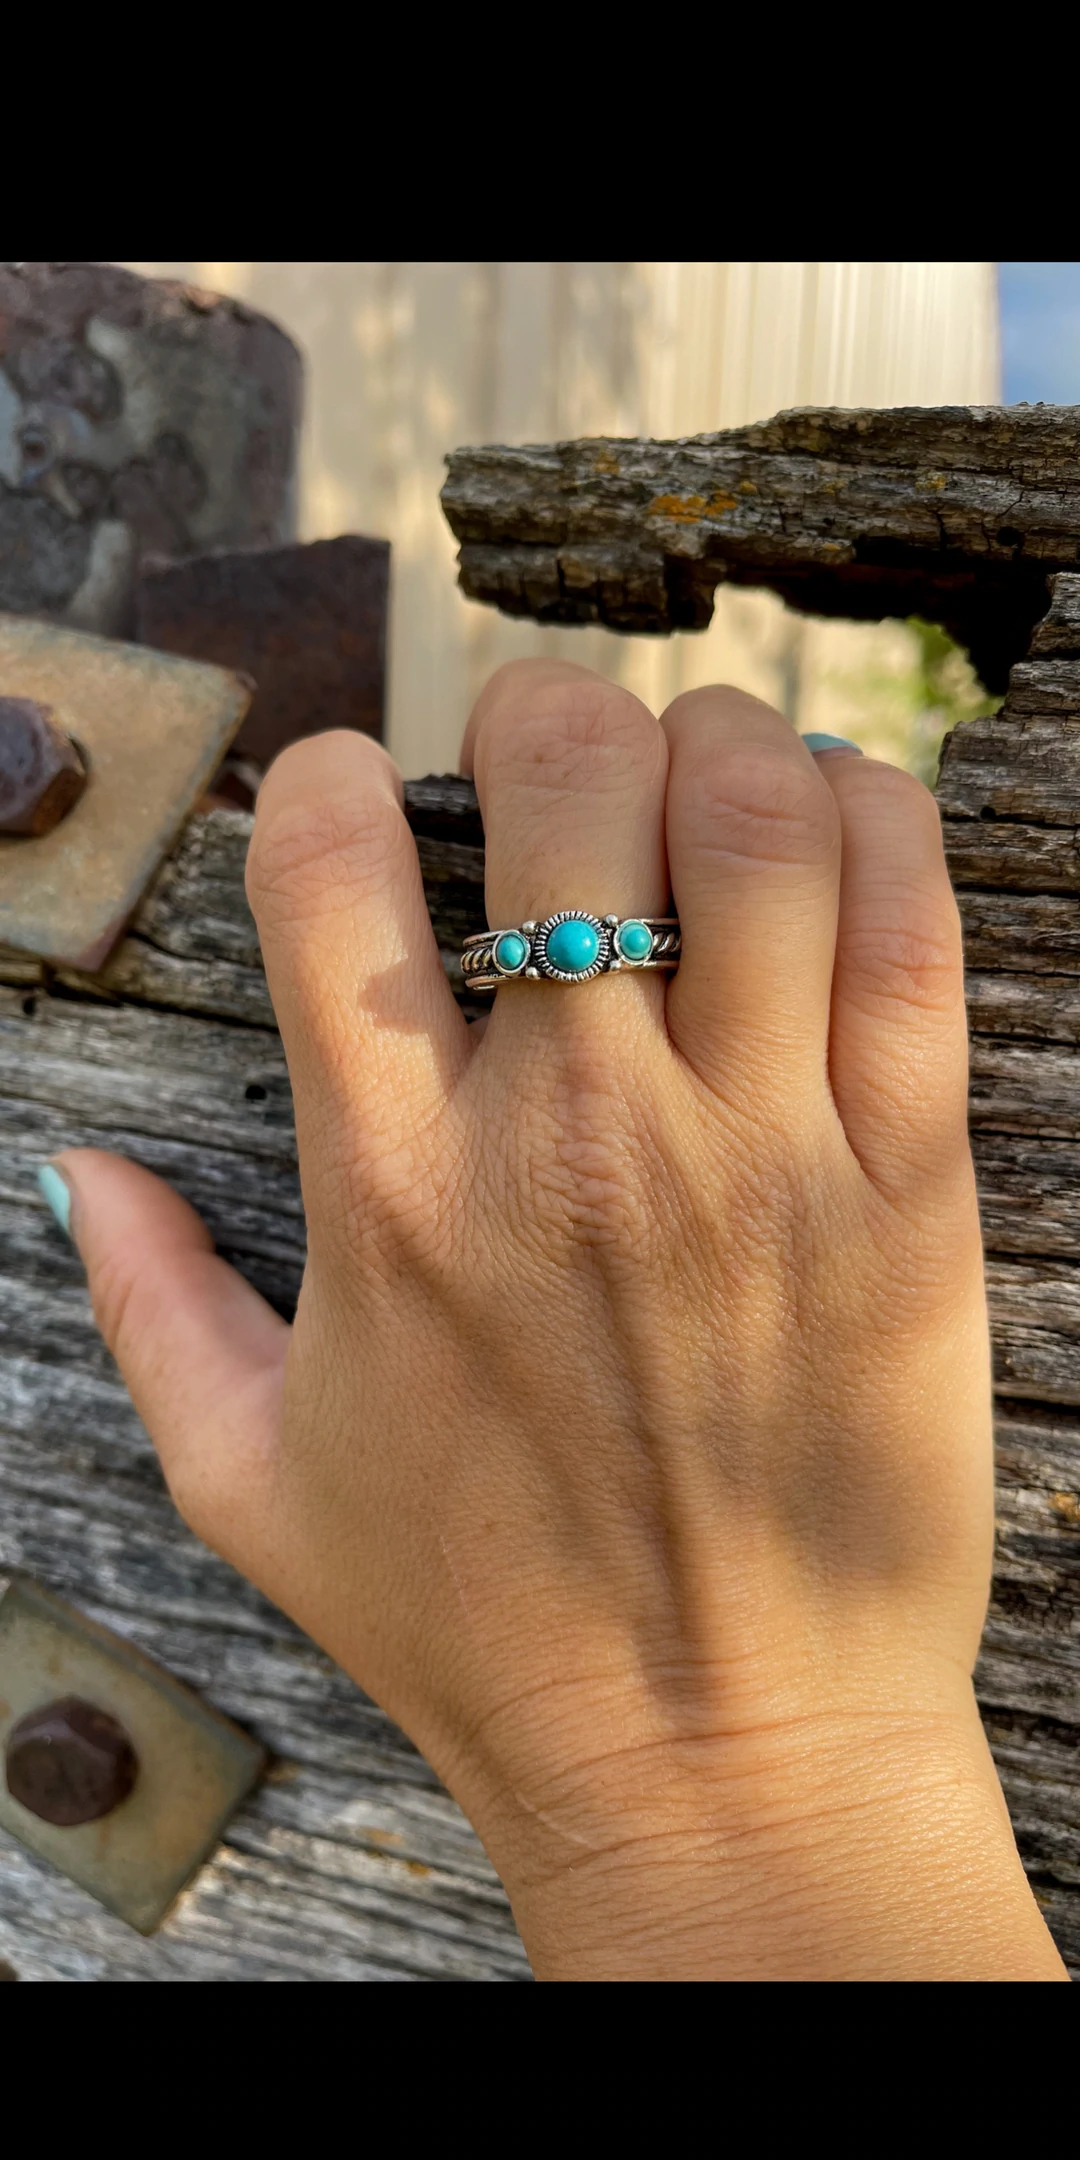 Gillette Turquoise Ring